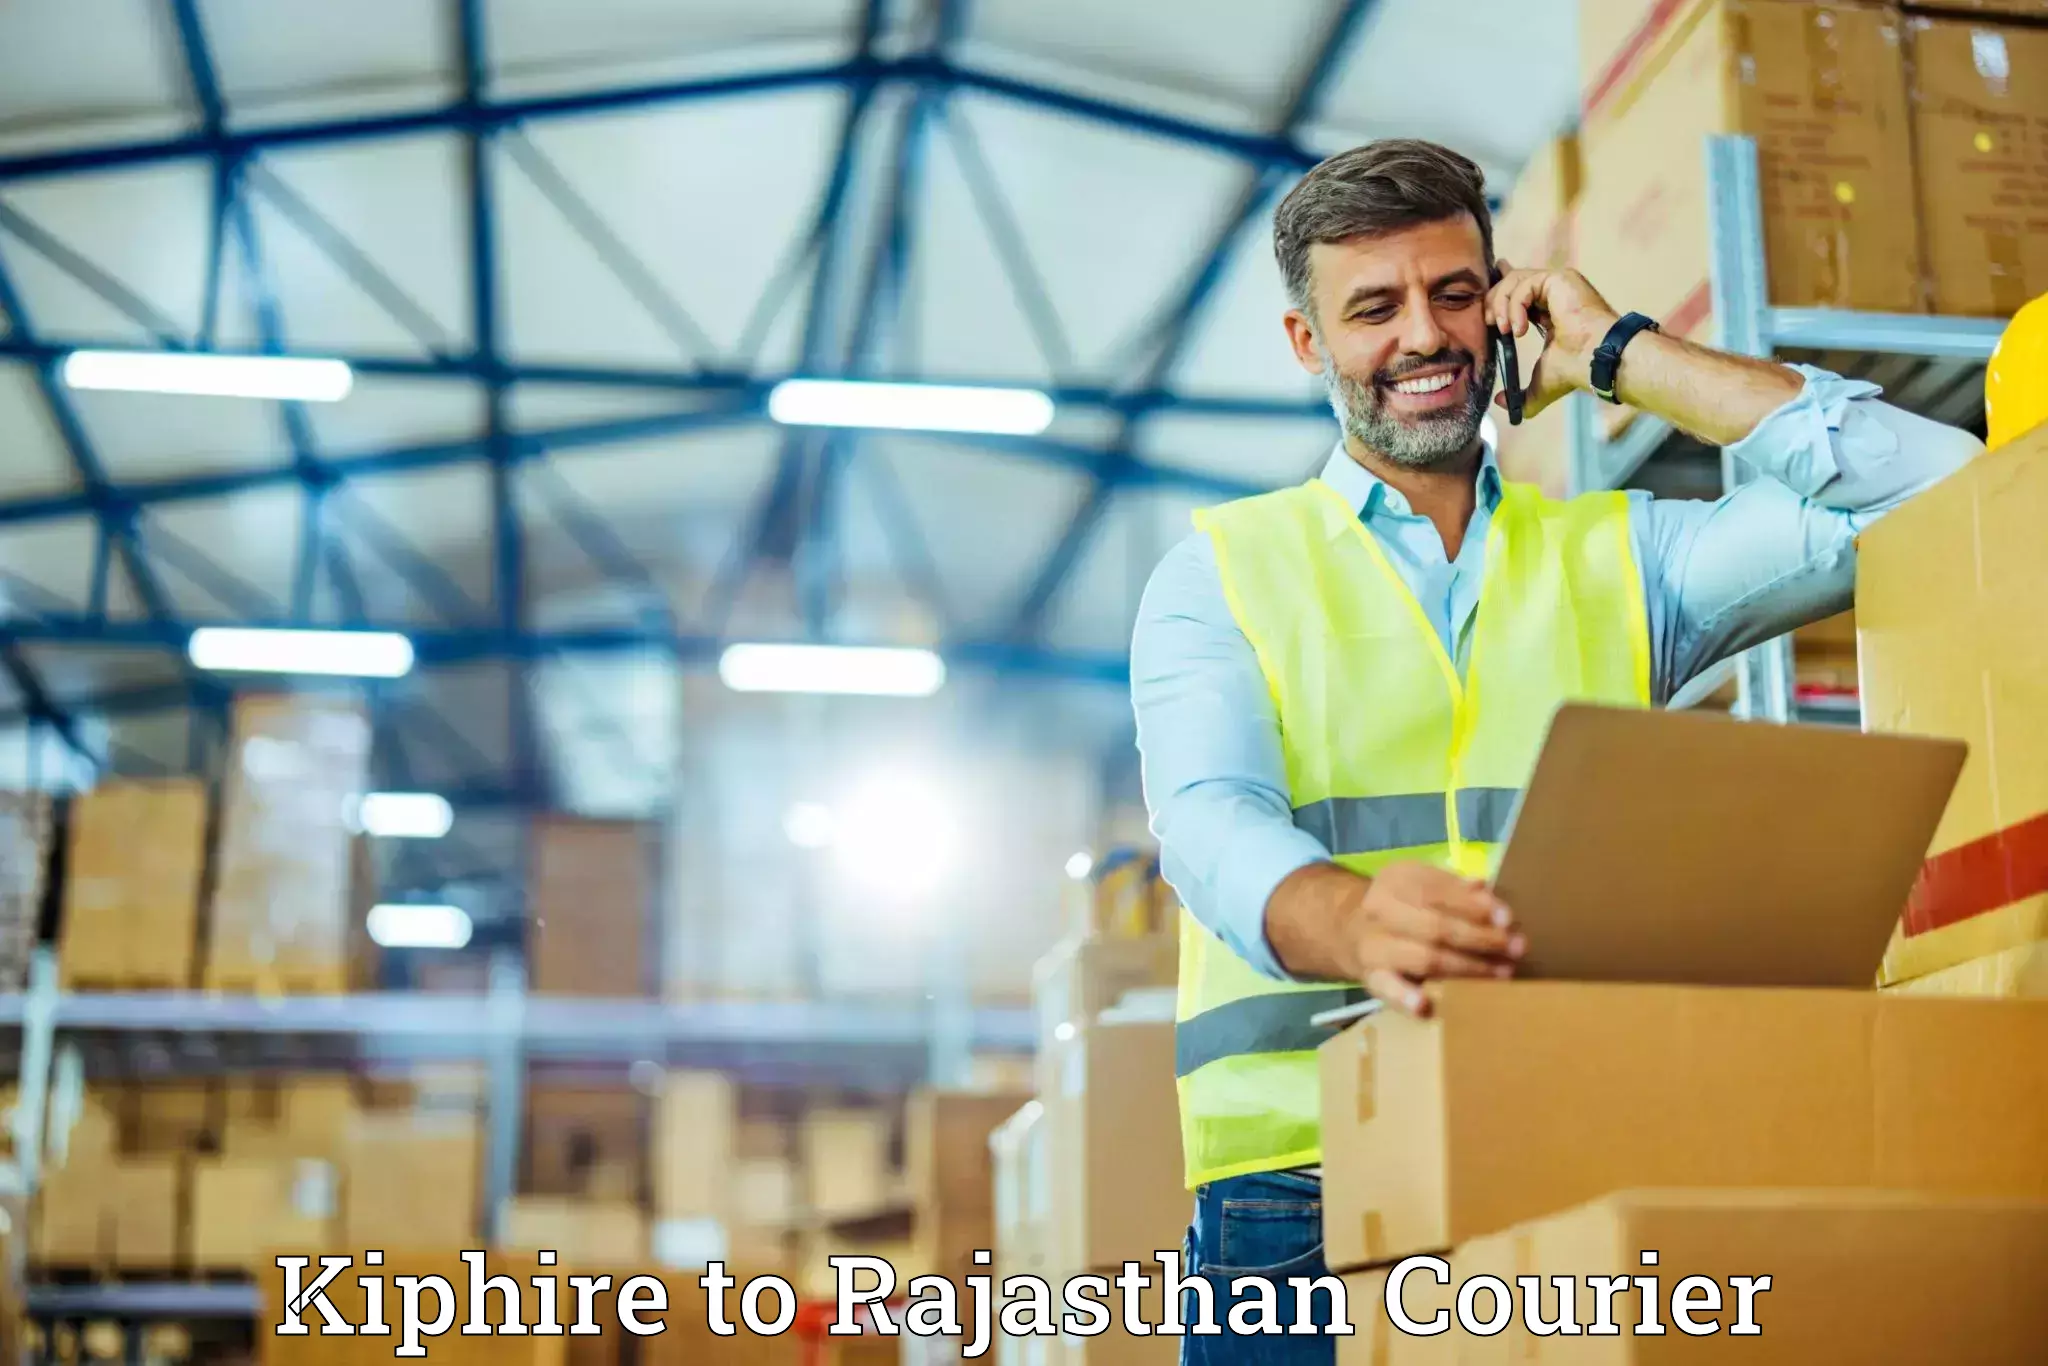 Furniture delivery service Kiphire to Rajasthan